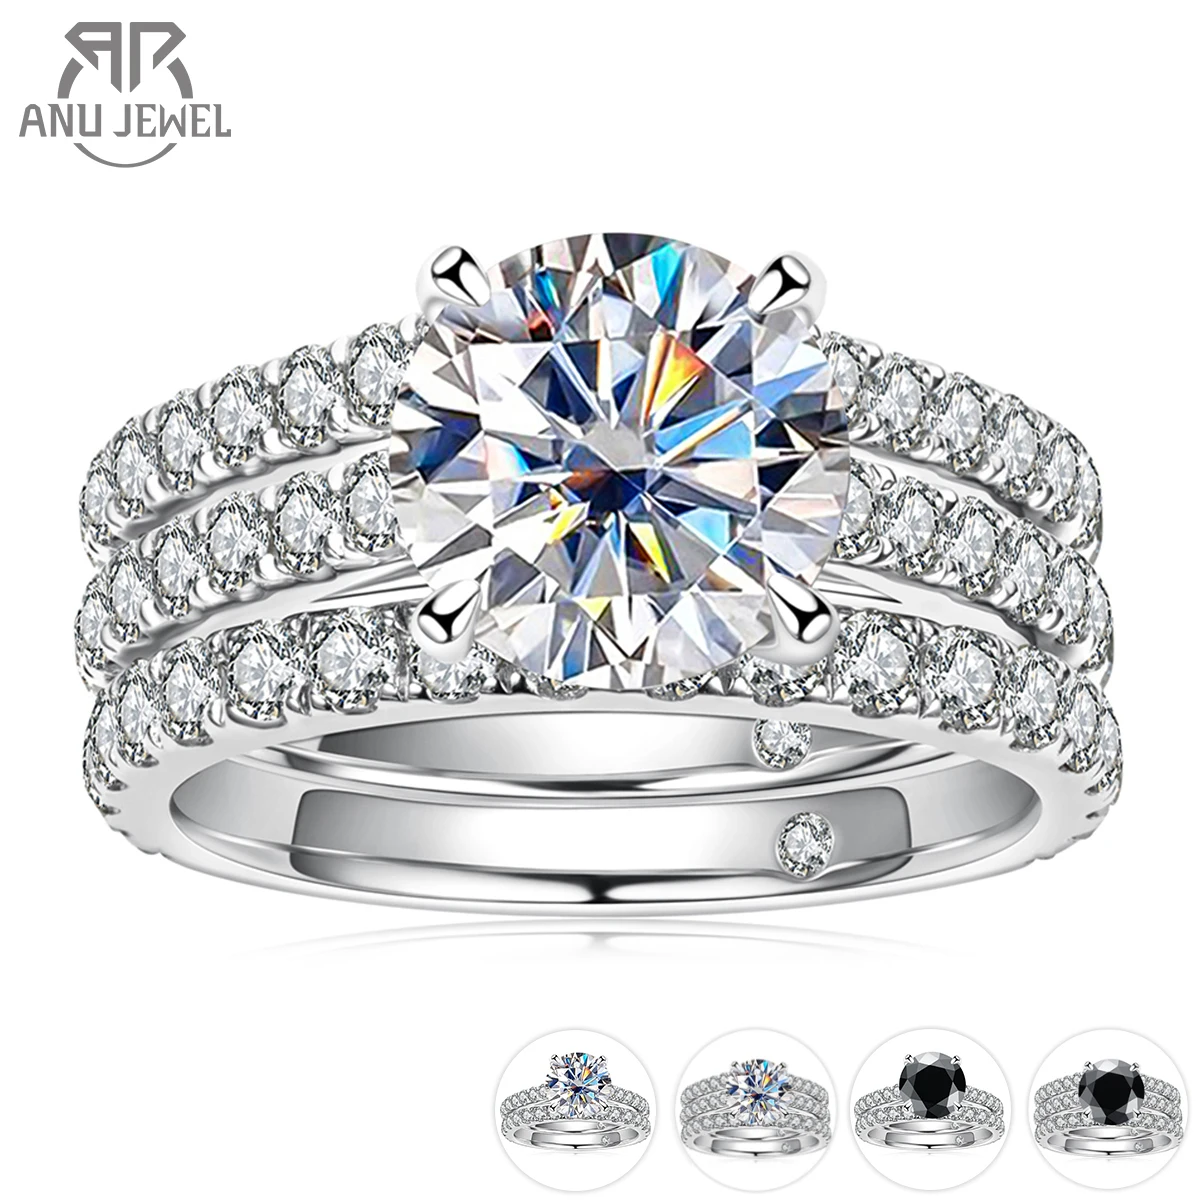 AnuJewel 3ct Main Stone(Total 4.15ct) D Color Moissanite Ring Set Bridal Sets Wedding Band Silver Rings With GRA Wholesale